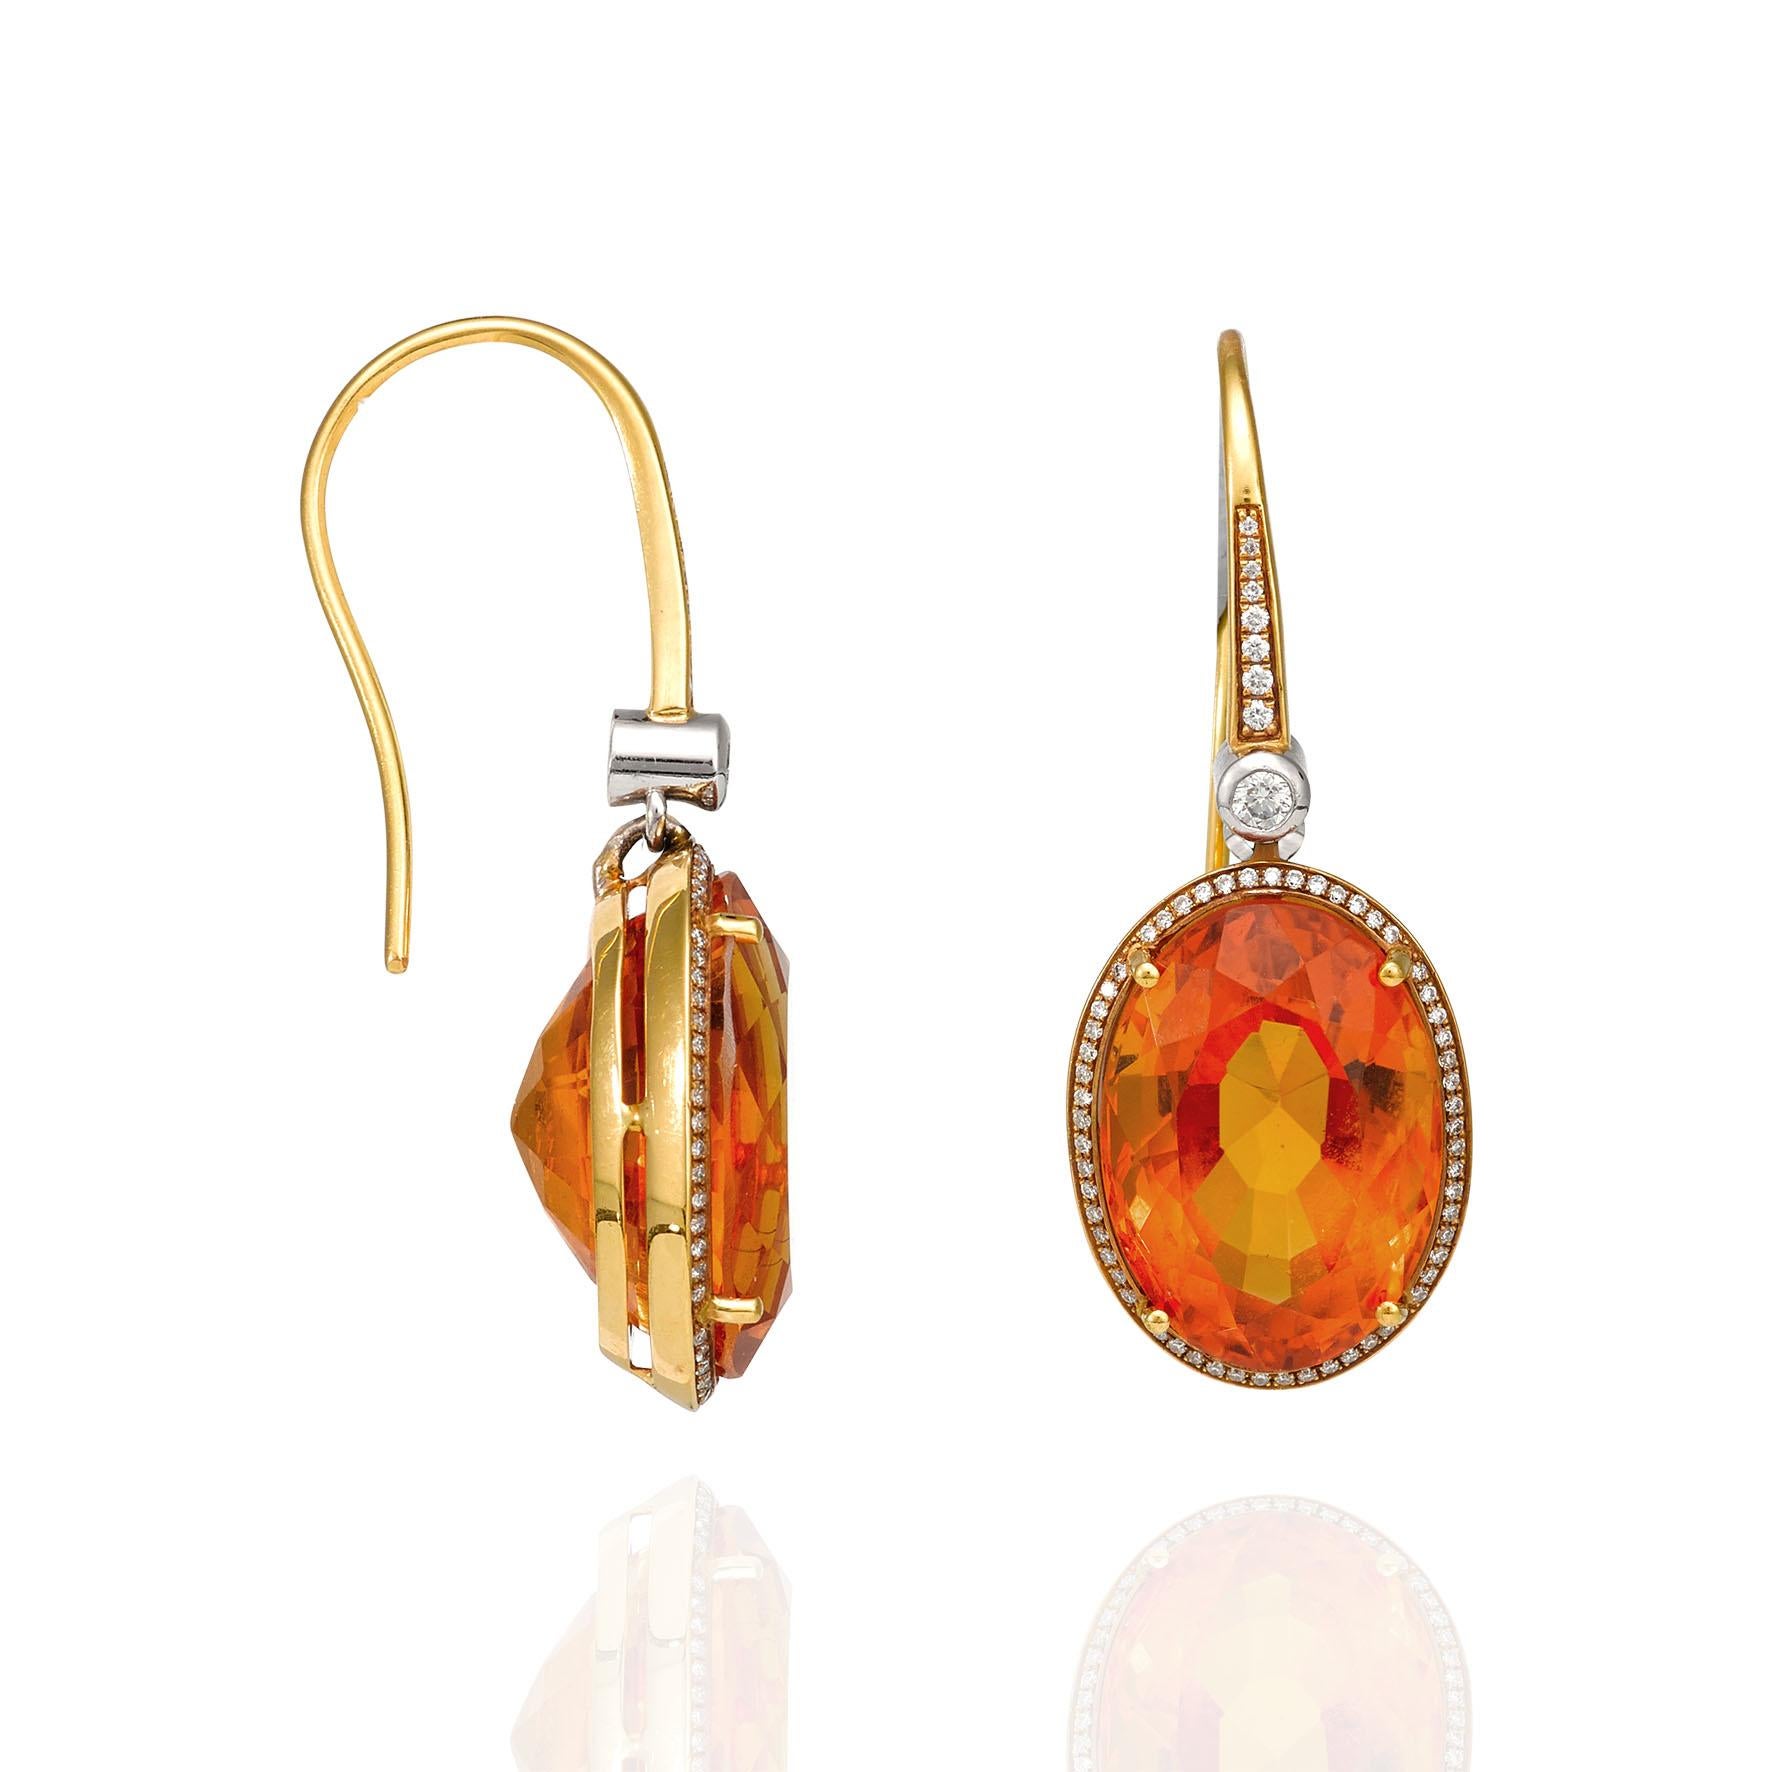 Giulians 18 karat yellow gold, citrine and diamond Earrings.  Each earring features a 9.00ct oval cut faceted citrine, prong set within a fine halo of round brilliant cut diamonds.  The pave set shepherd hook tops are articulated with a small